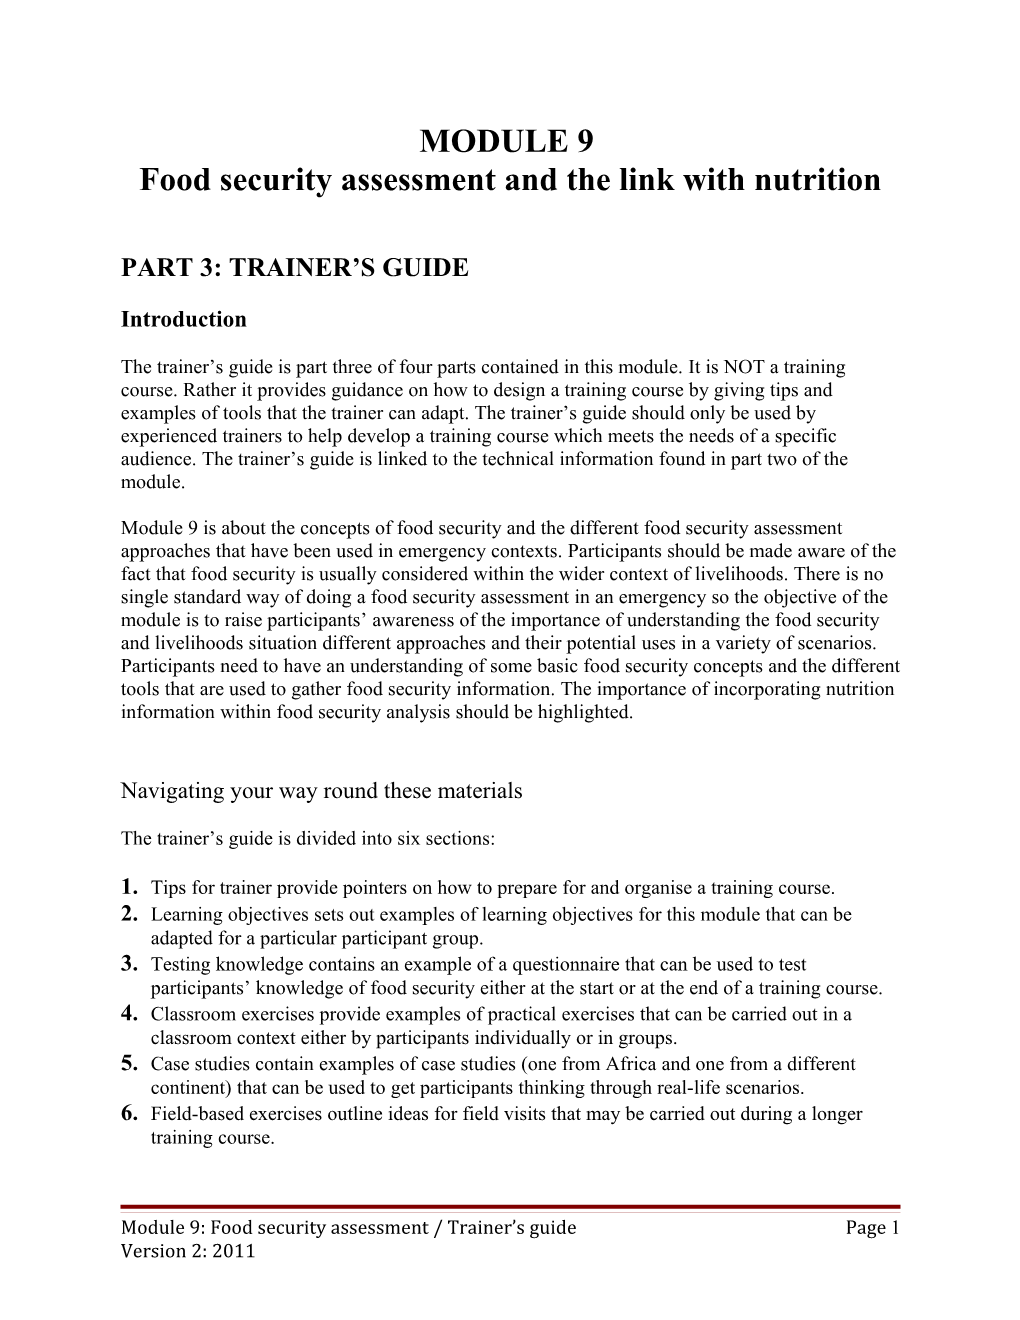 Food Security Assessment and the Link with Nutrition